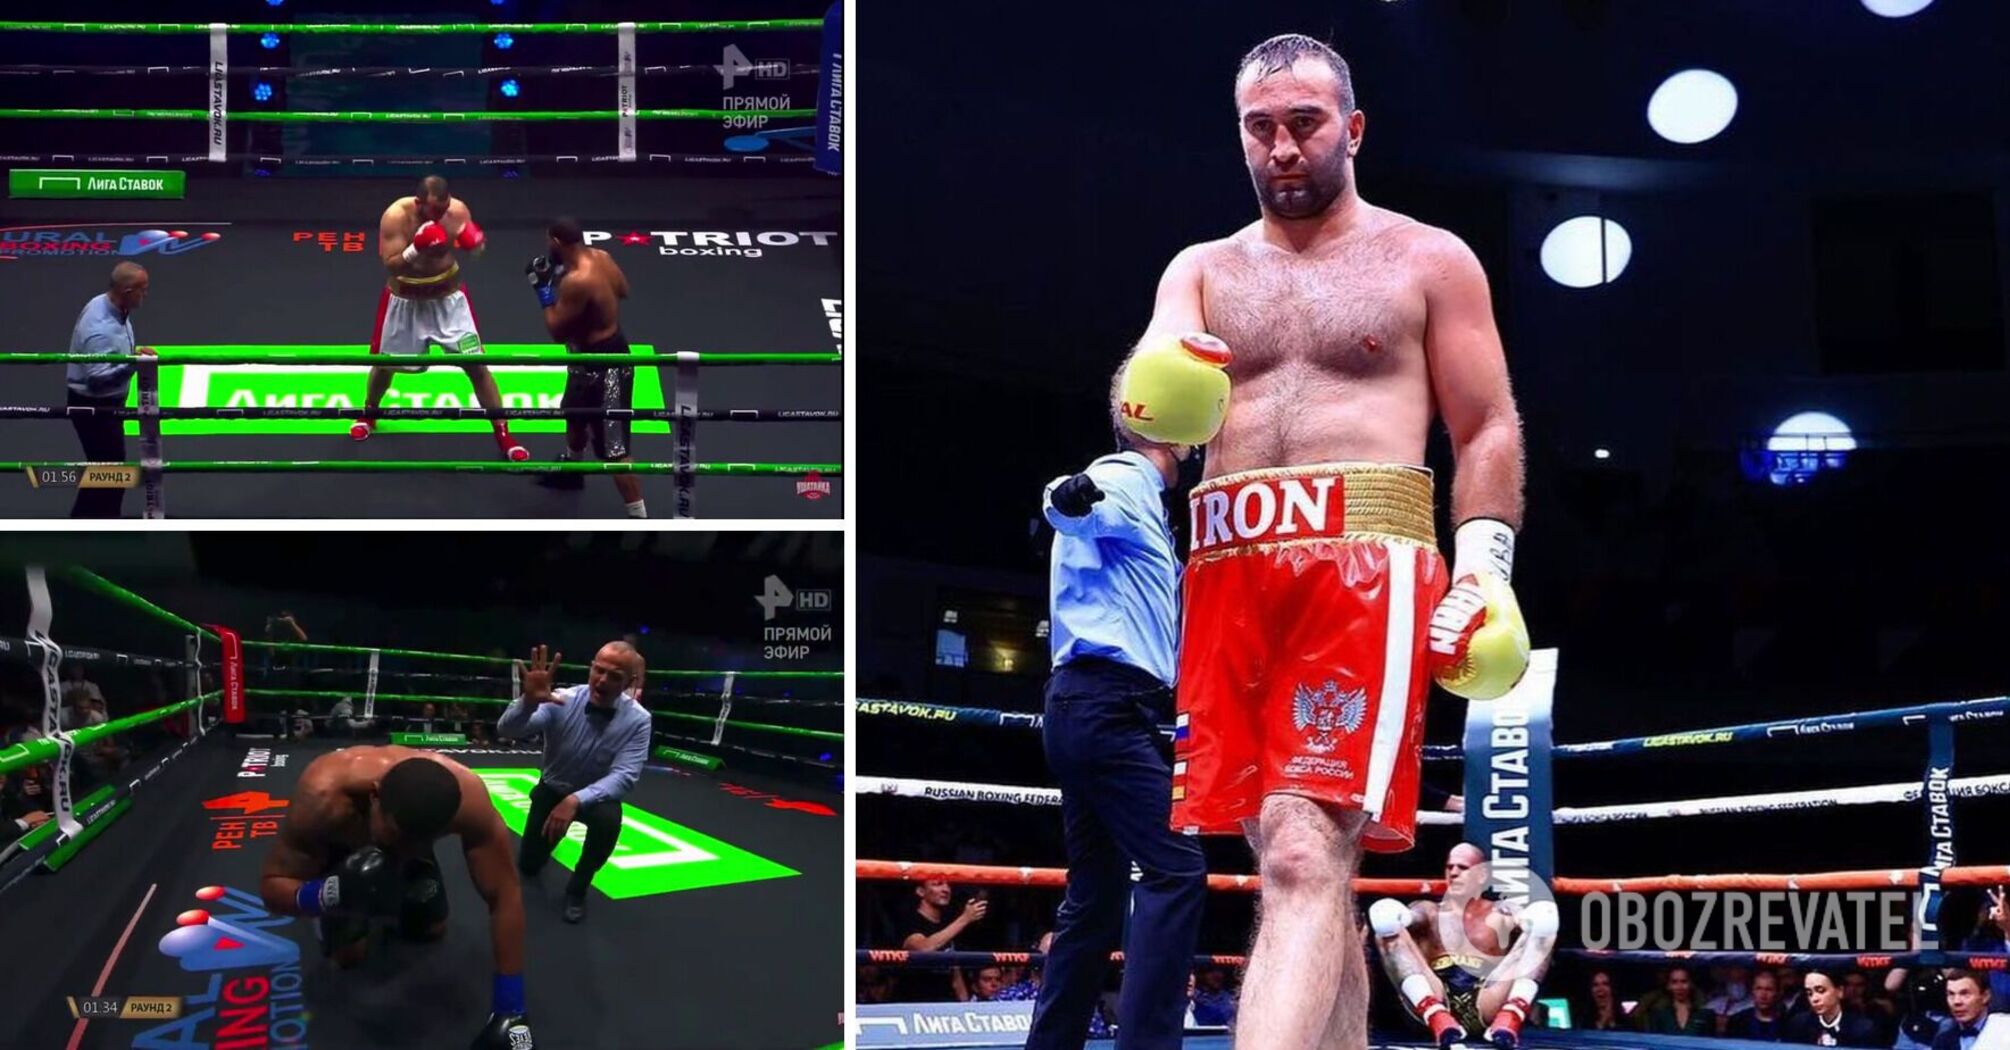 Russian victim Usik knocked out the American super heavyweight in his first serious punch in the championship fight. Video